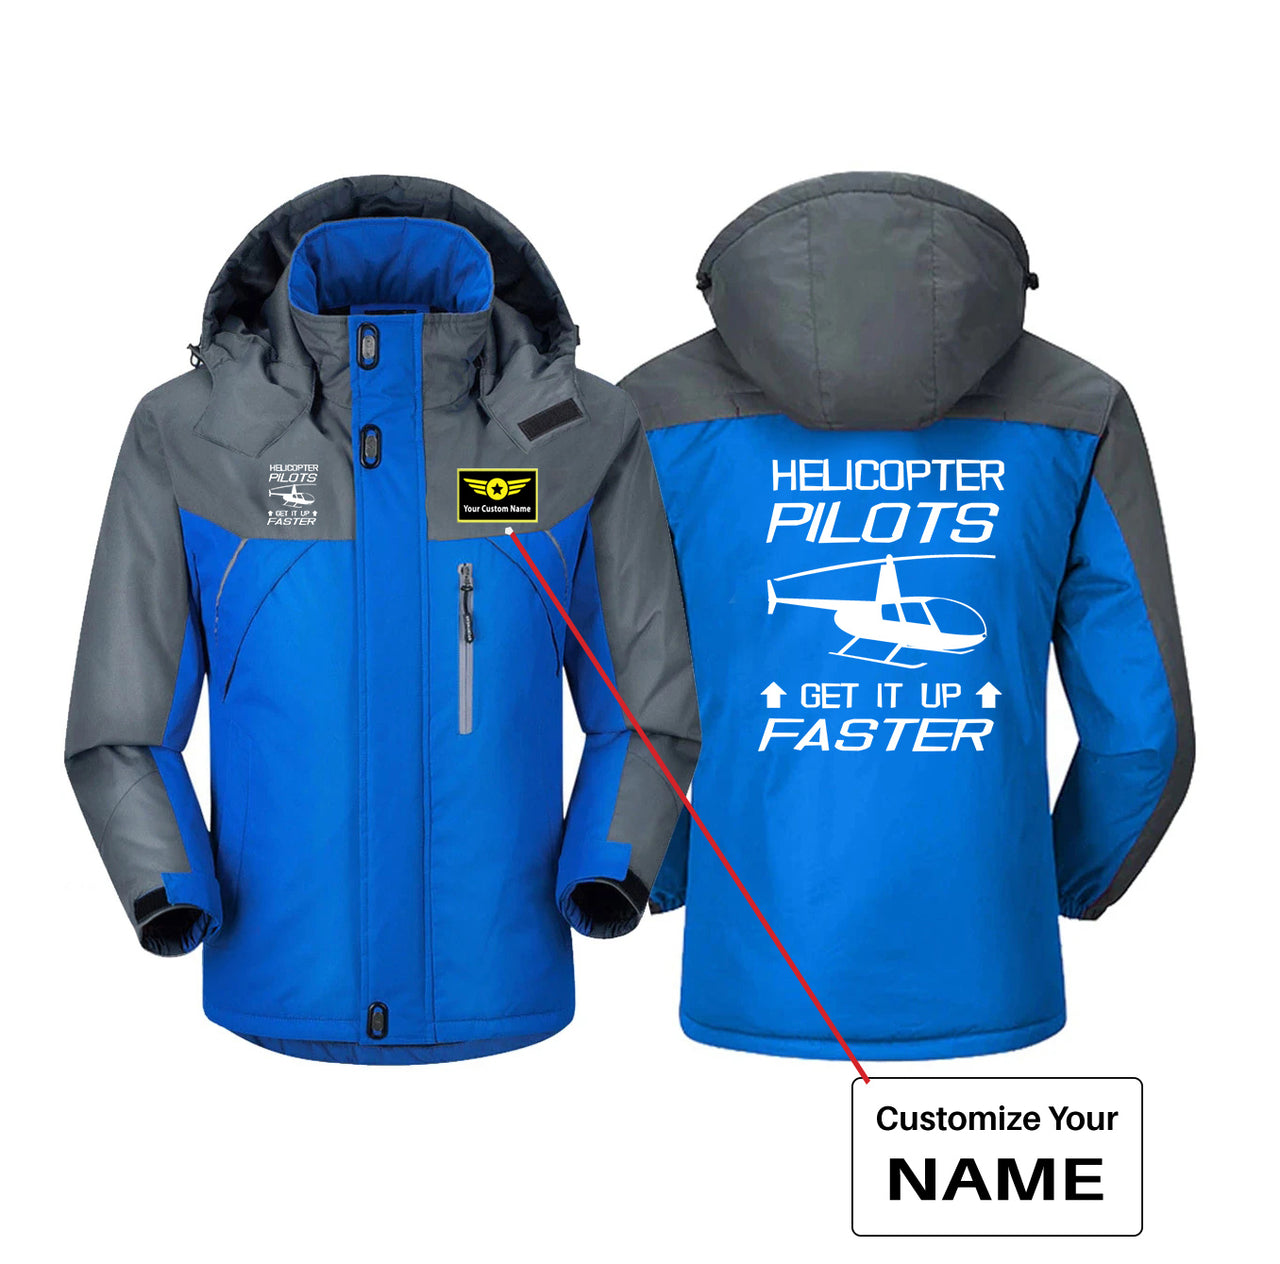 Helicopter Pilots Get It Up Faster Designed Thick Winter Jackets